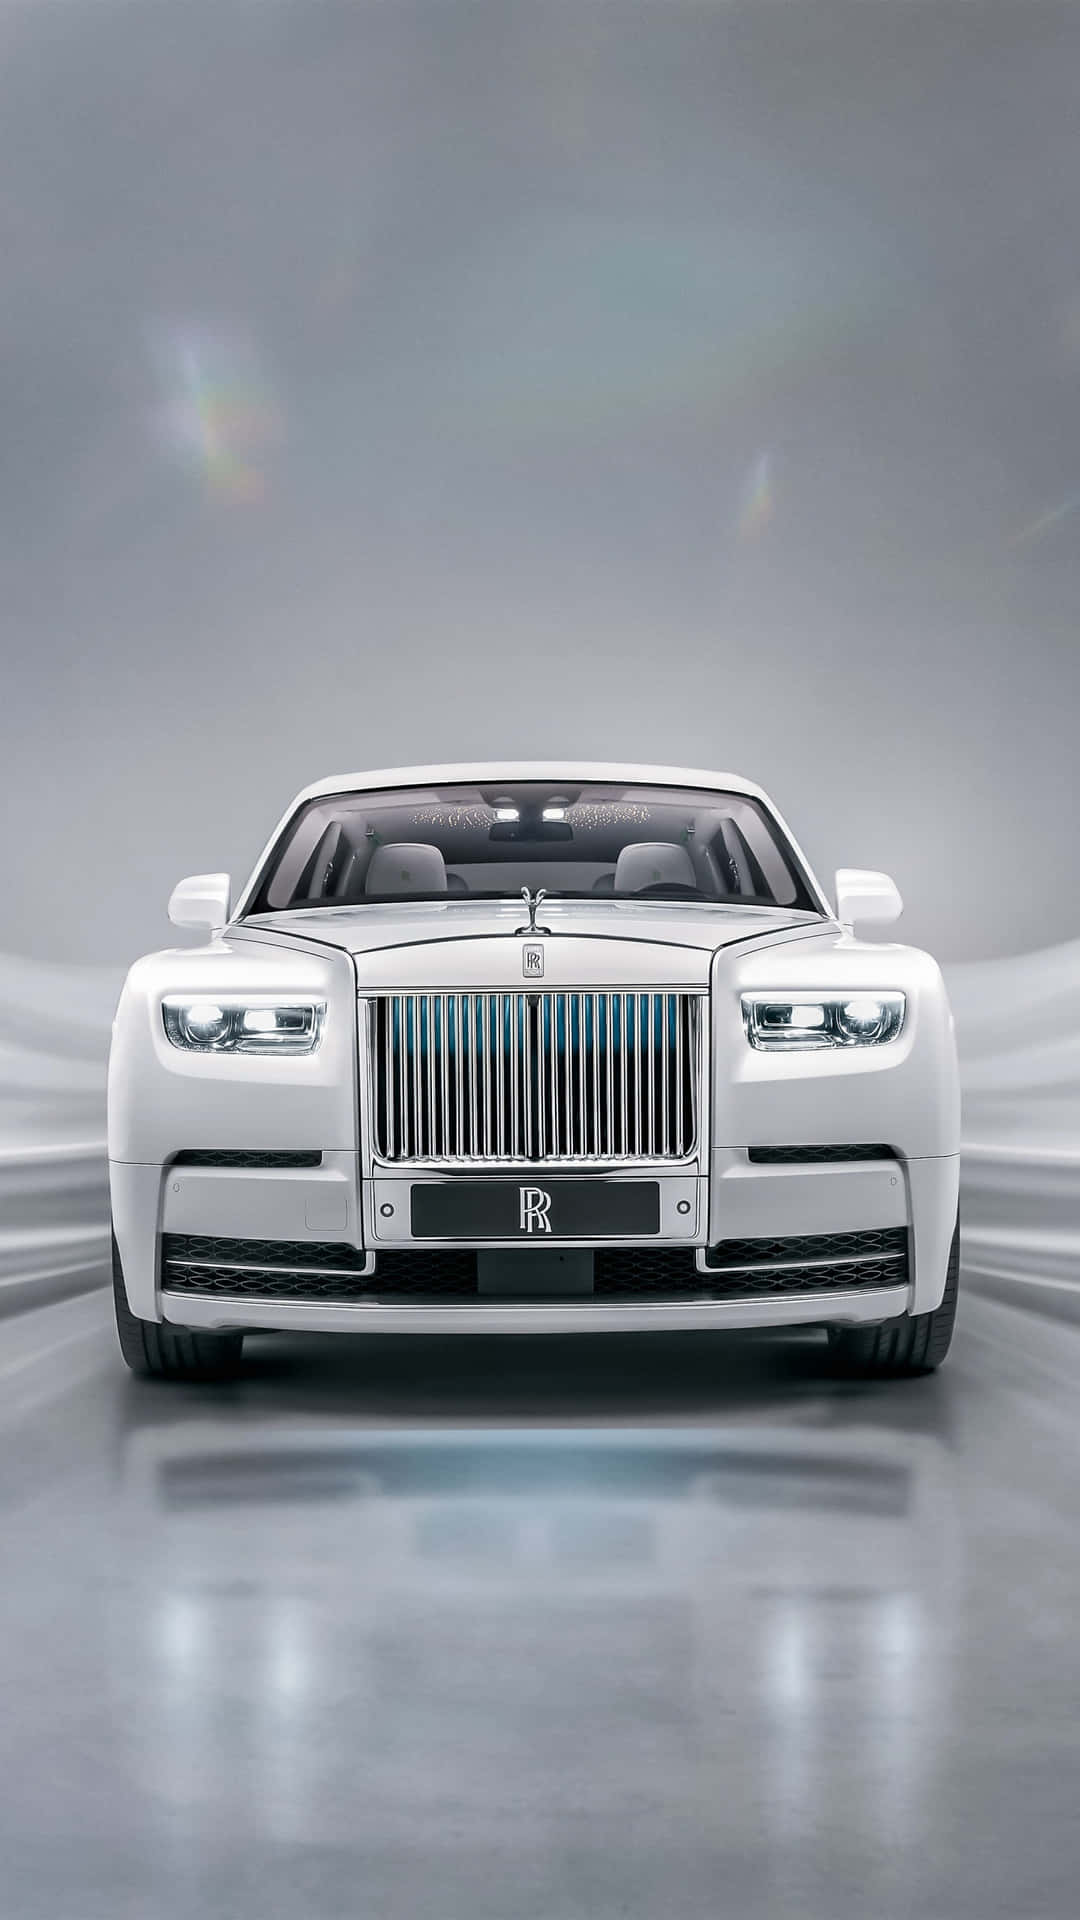 Rolls Royce Ghost - A White Car With A White Front